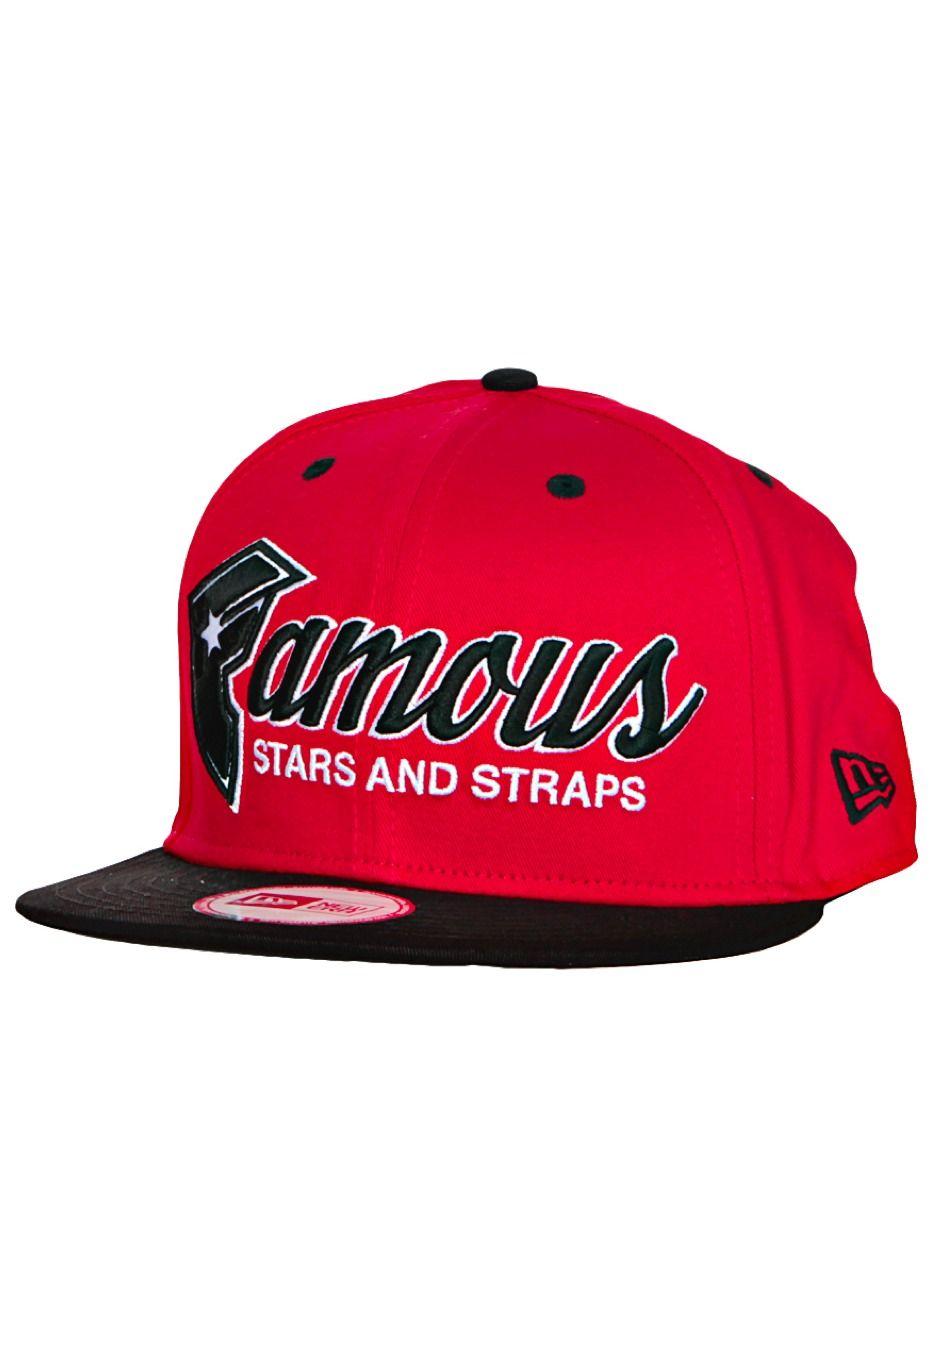 Red Famous Stars and Straps Logo - Famous Stars And Straps - Fast Break New Era Red/Black Snapback ...